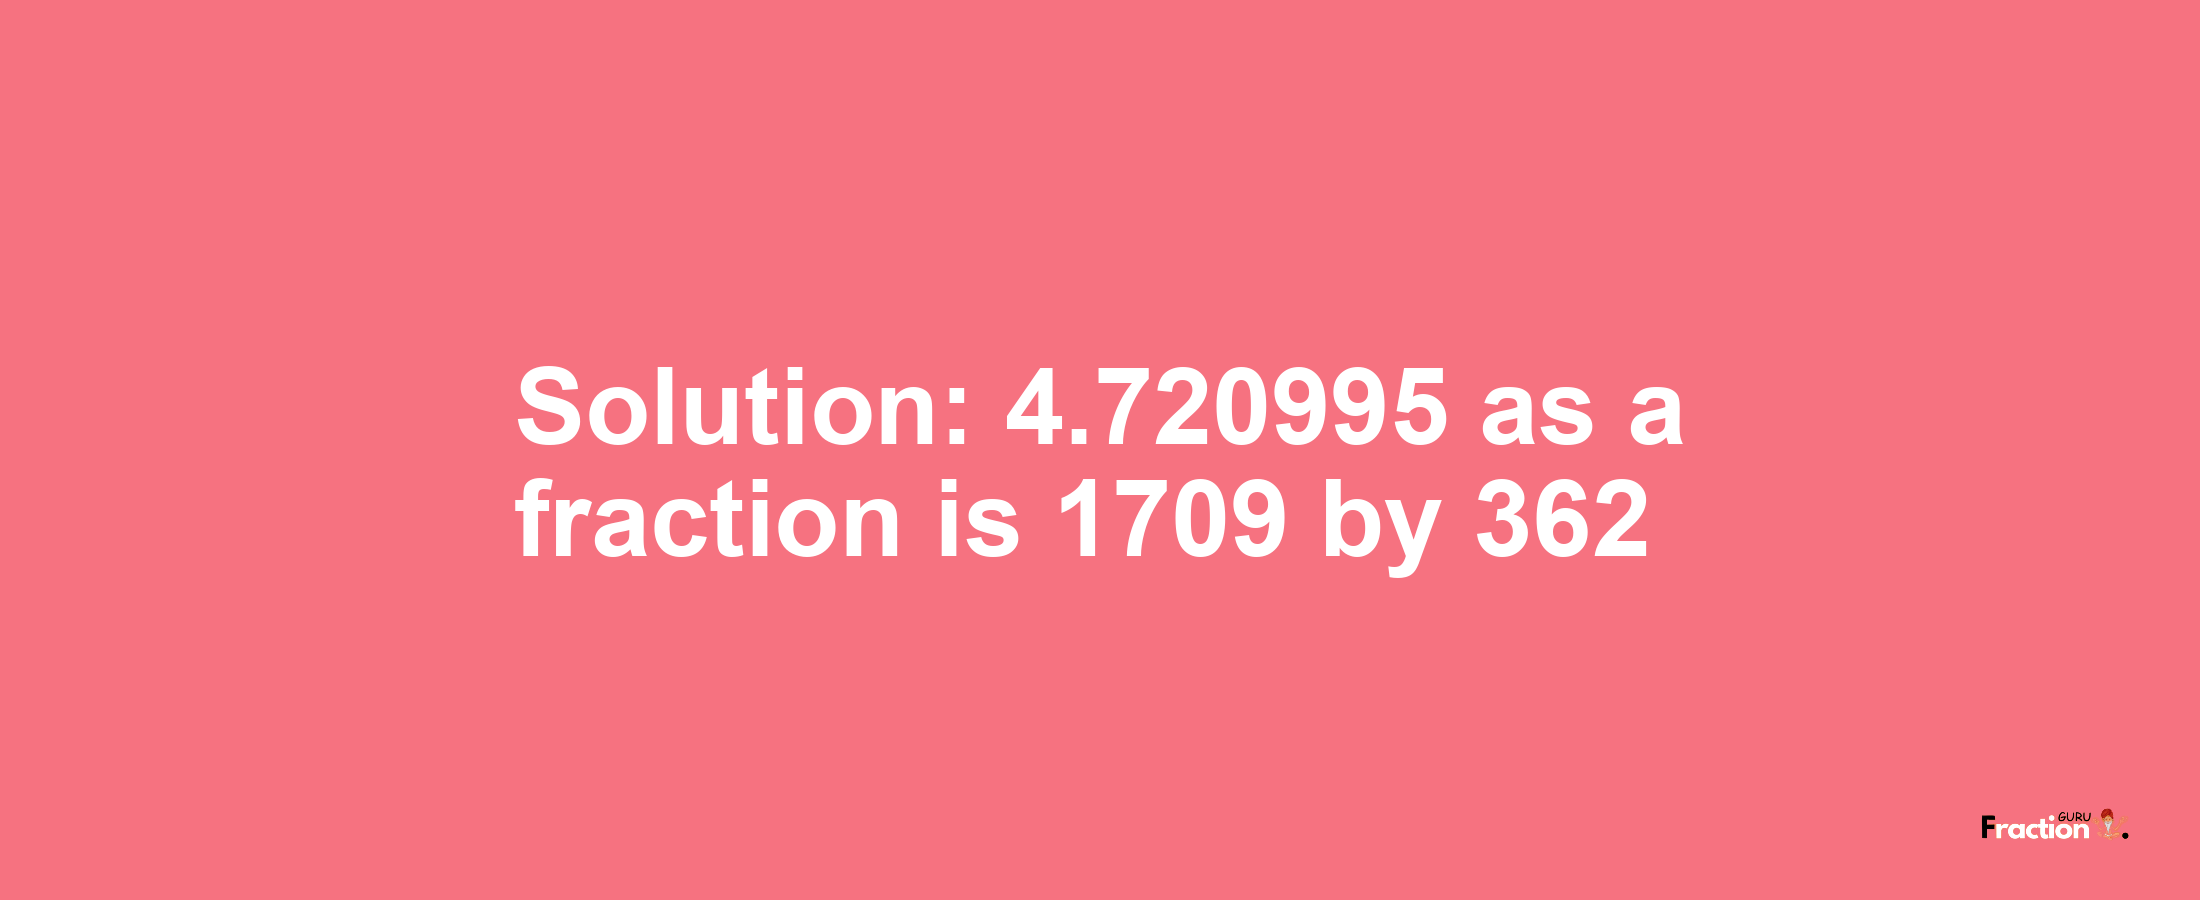 Solution:4.720995 as a fraction is 1709/362